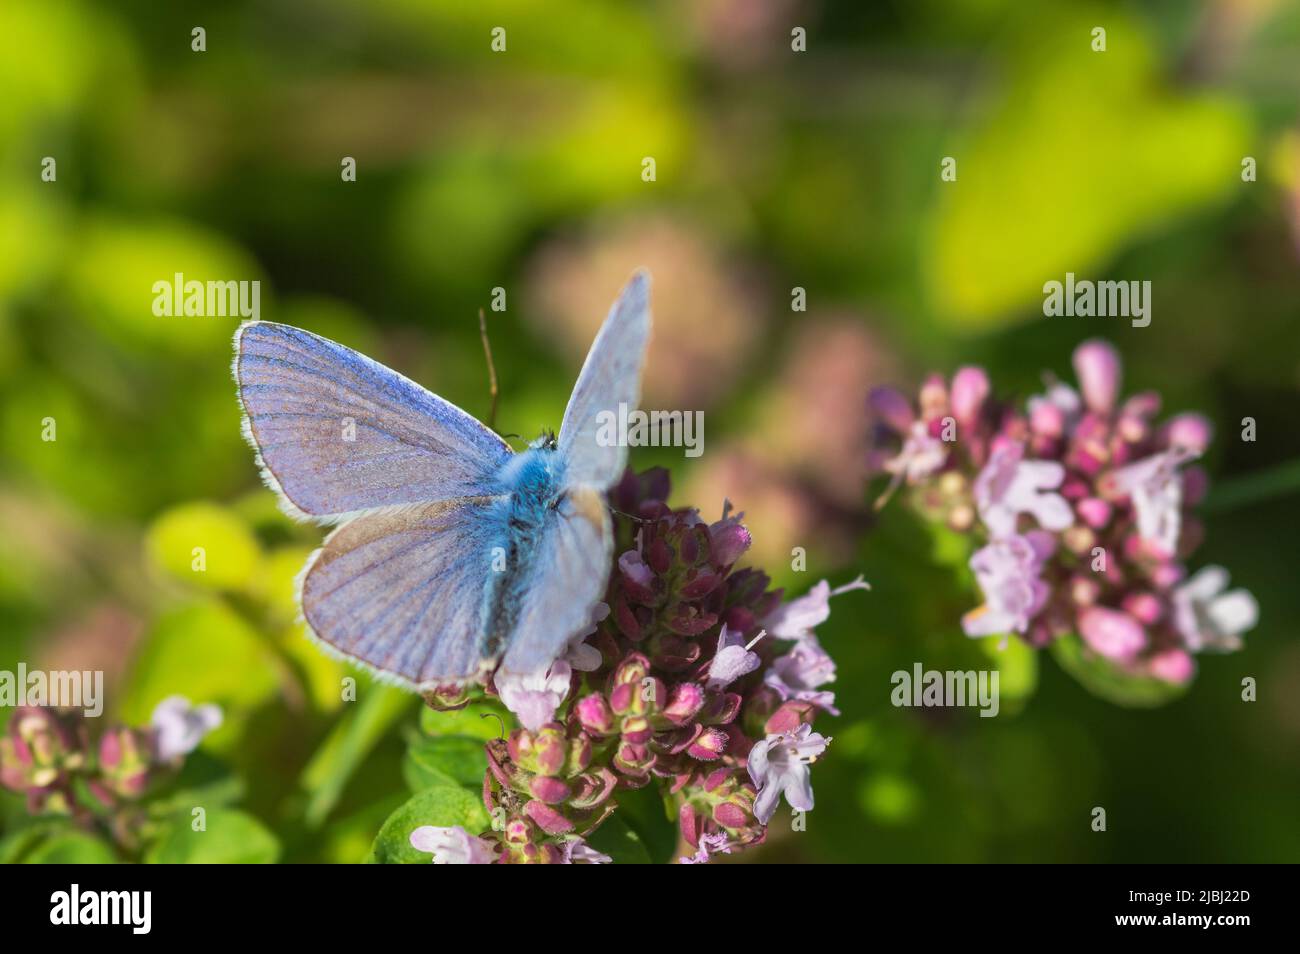 Close-up of a blue butterfly (Lycaenidae) on purple flowers with a blurred green background Stock Photo